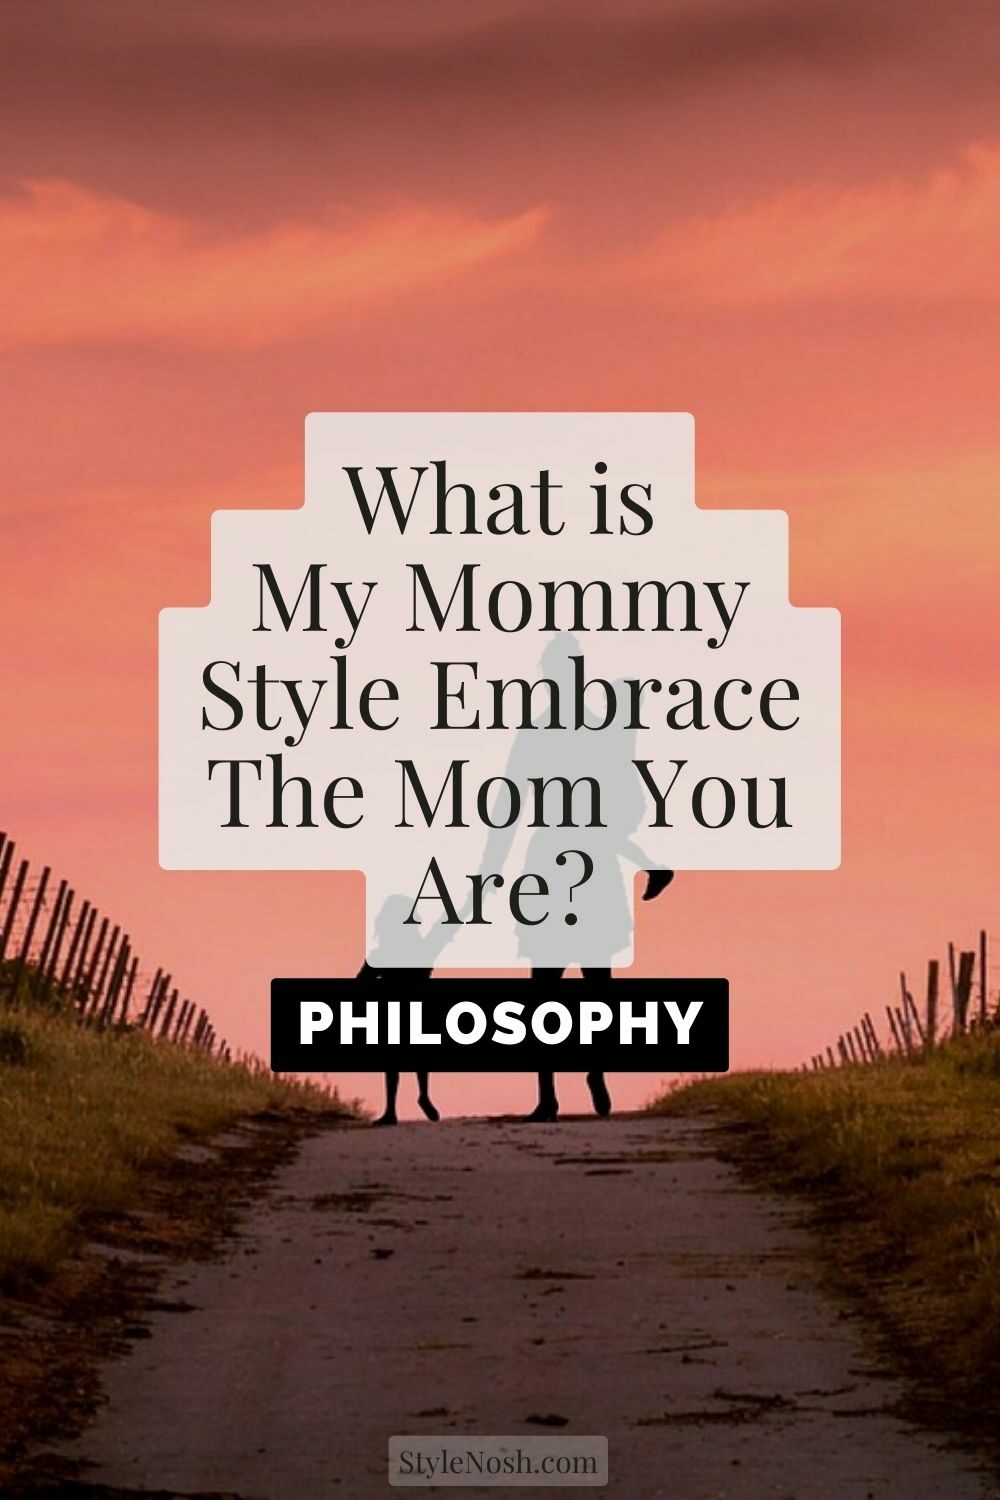 What is My Mommy Style Embrace The Mom You Are featured image